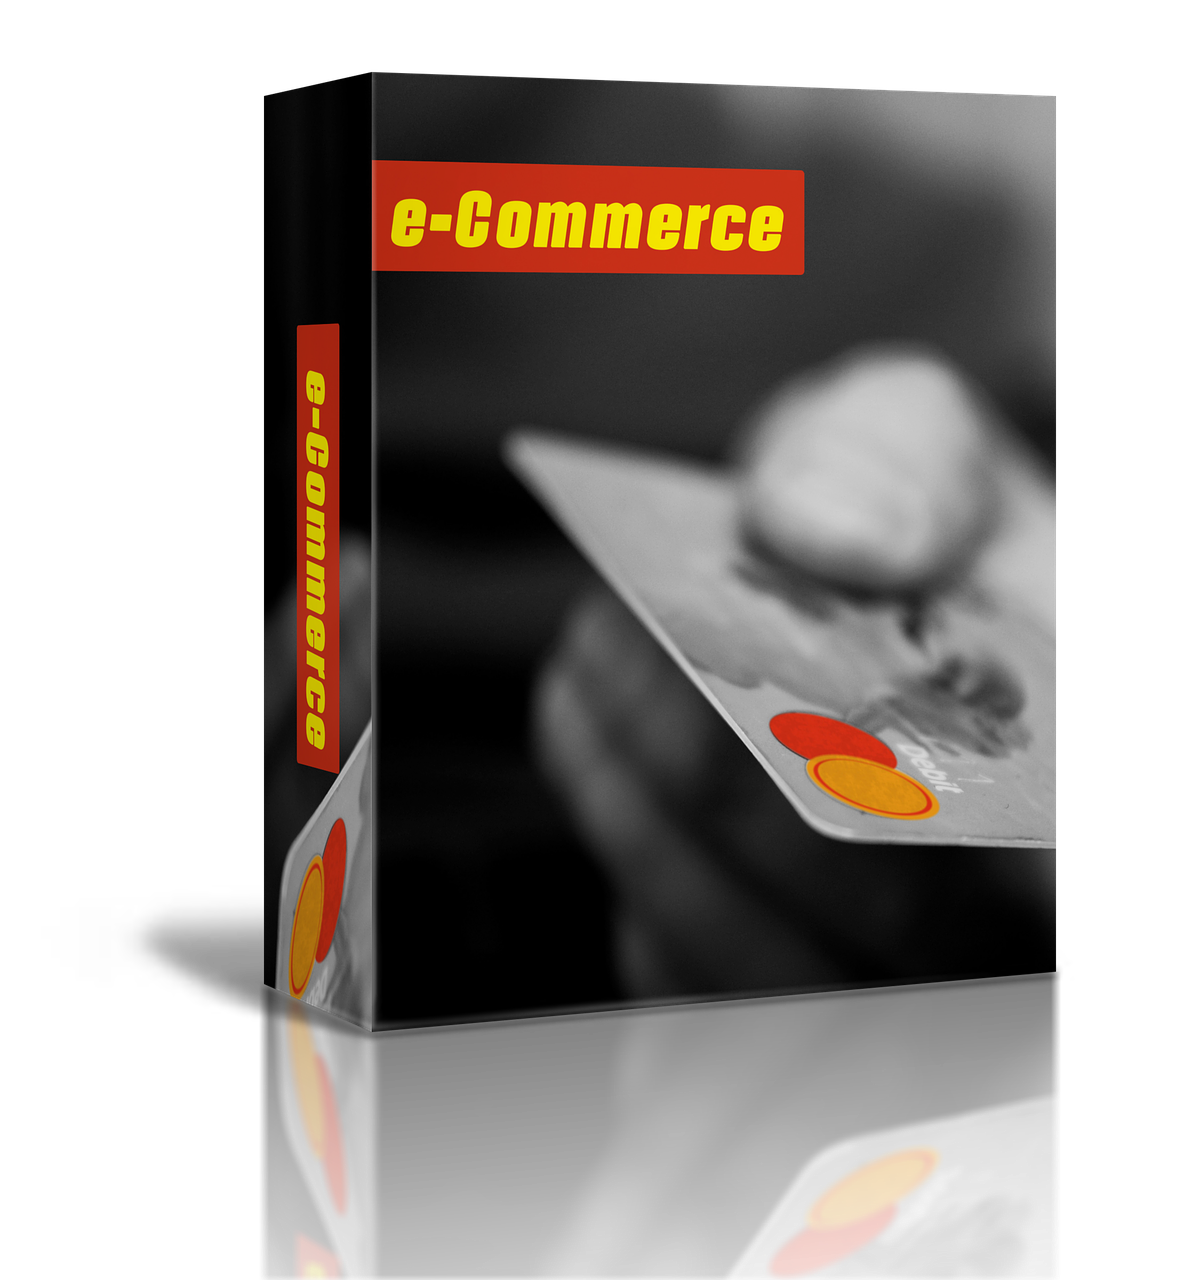 How to Move Your Brick and Mortar Retail Store Online - A software package labelled "e-Commerce" with a hand presenting a credit card